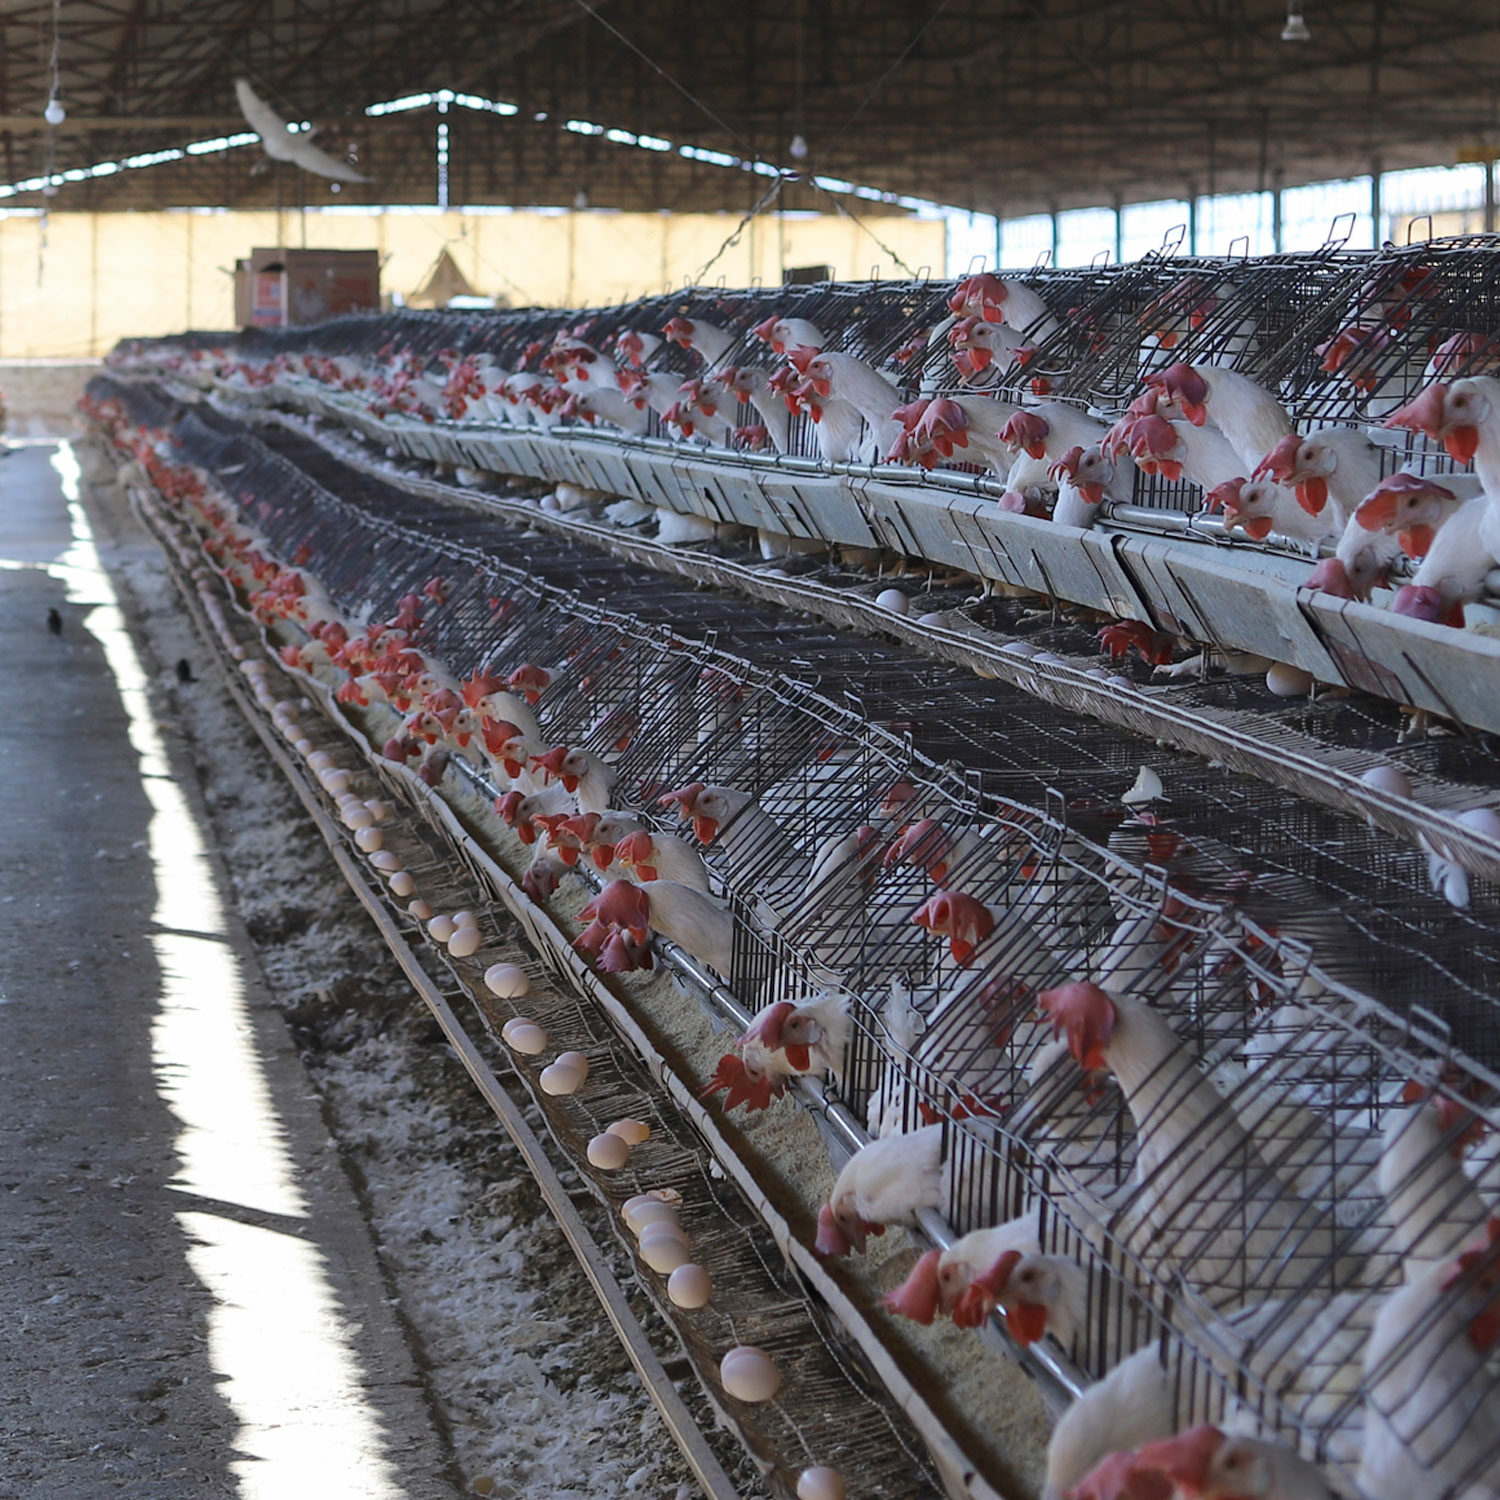 view of hundreds of hens inside cages